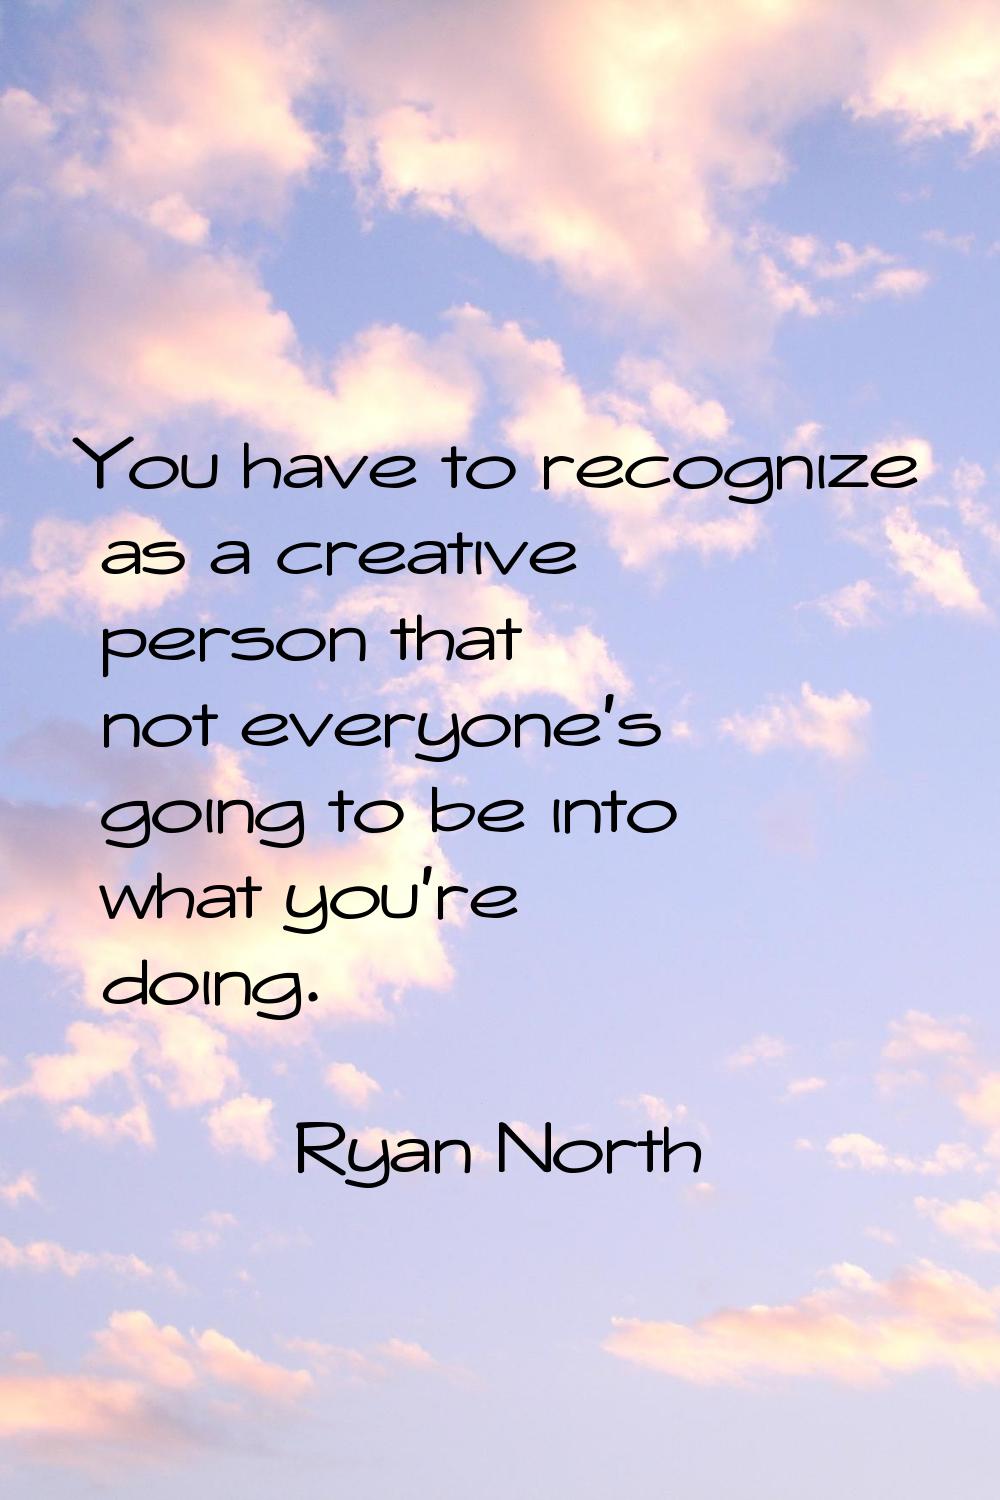 You have to recognize as a creative person that not everyone's going to be into what you're doing.